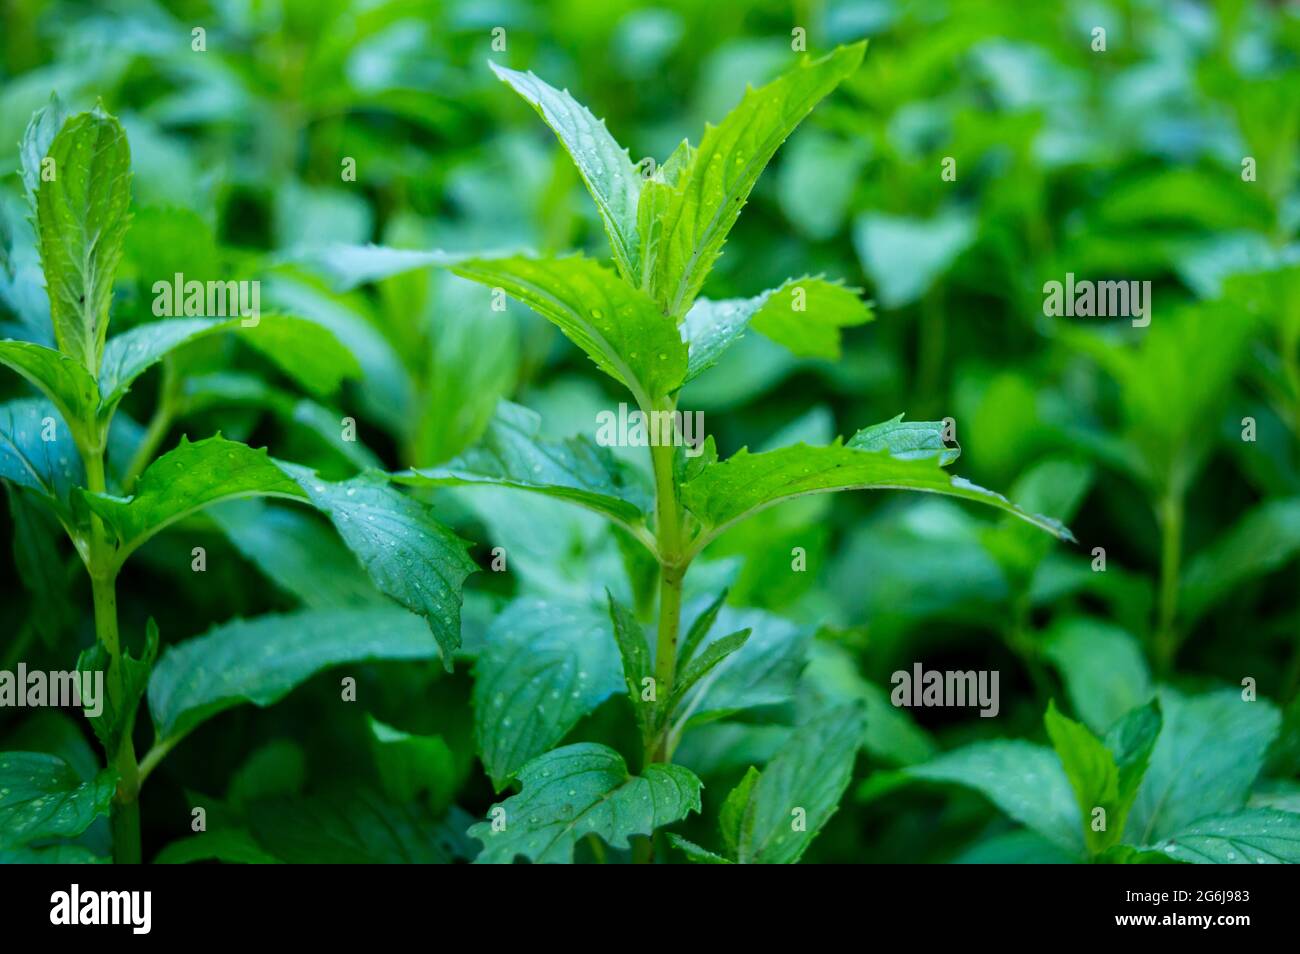 lush mints background.Green mint leaves pattern layout design. Ecology natural creative concept. Green mint leaves with raindrops on top. green. Stock Photo